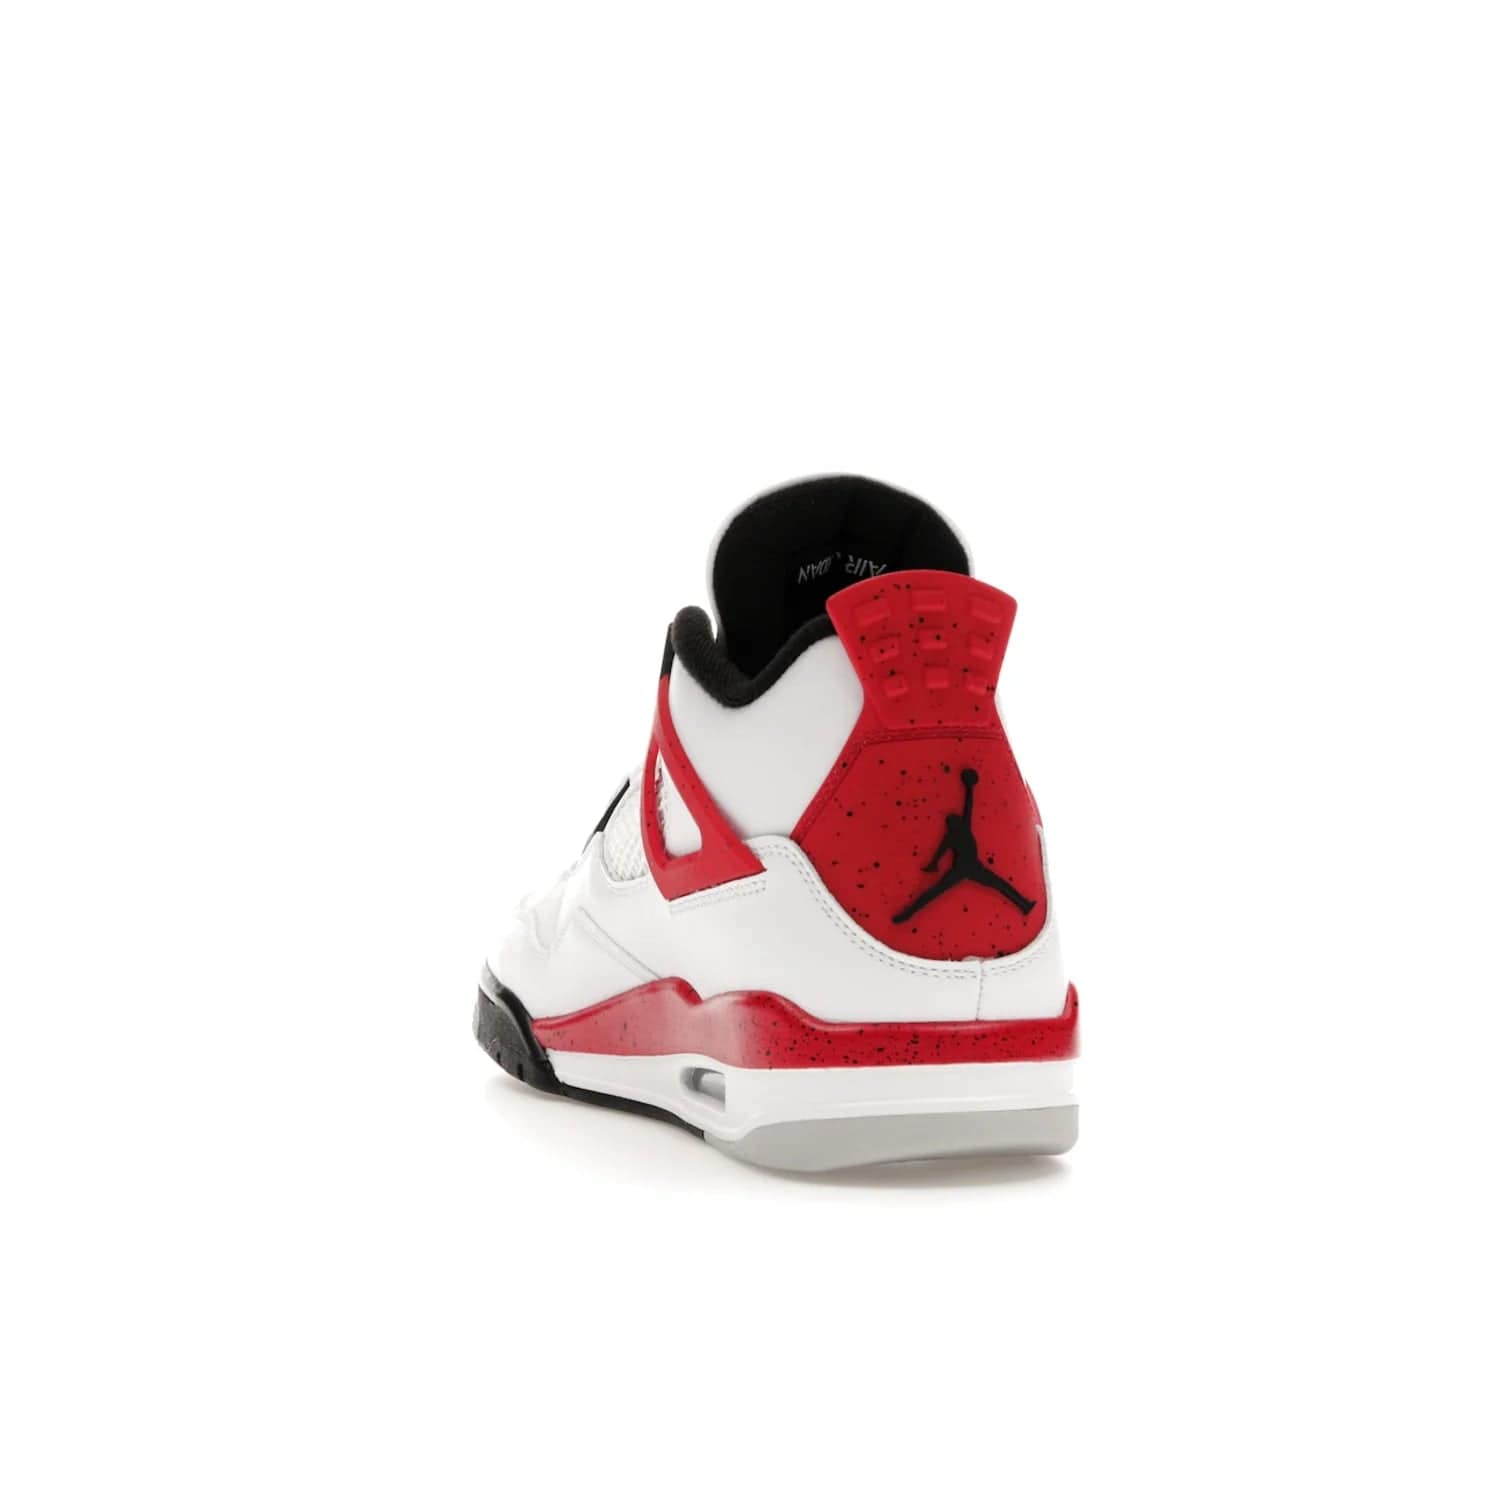 Jordan 4 Retro Red Cement - Image 26 - Only at www.BallersClubKickz.com - Iconic Jordan silhouette with a unique twist. White premium leather uppers with fire red and black detailing. Black, white, and fire red midsole with mesh detailing and Jumpman logo. Jordan 4 Retro Red Cement released with premium price.